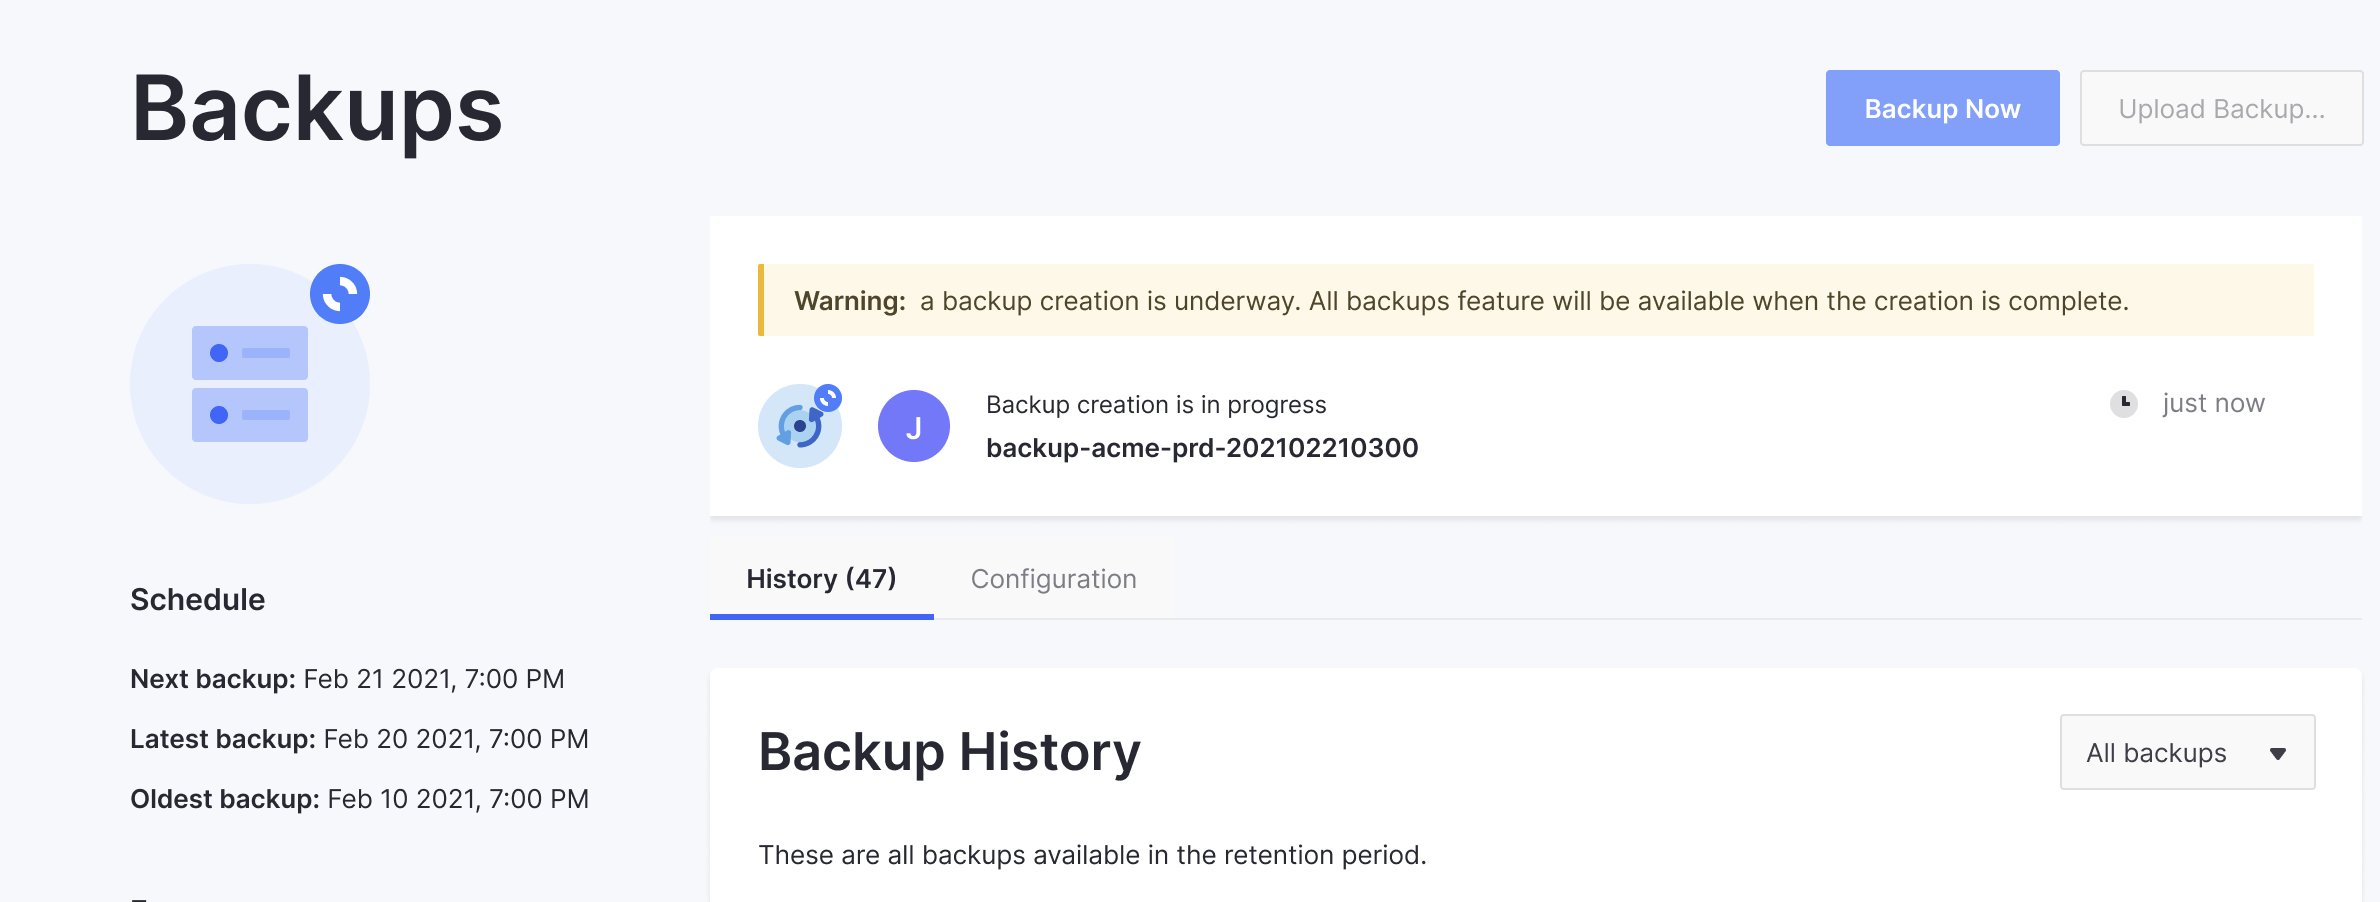 The backup service icon and a message at the top of the screen indicate a backup is in progress.